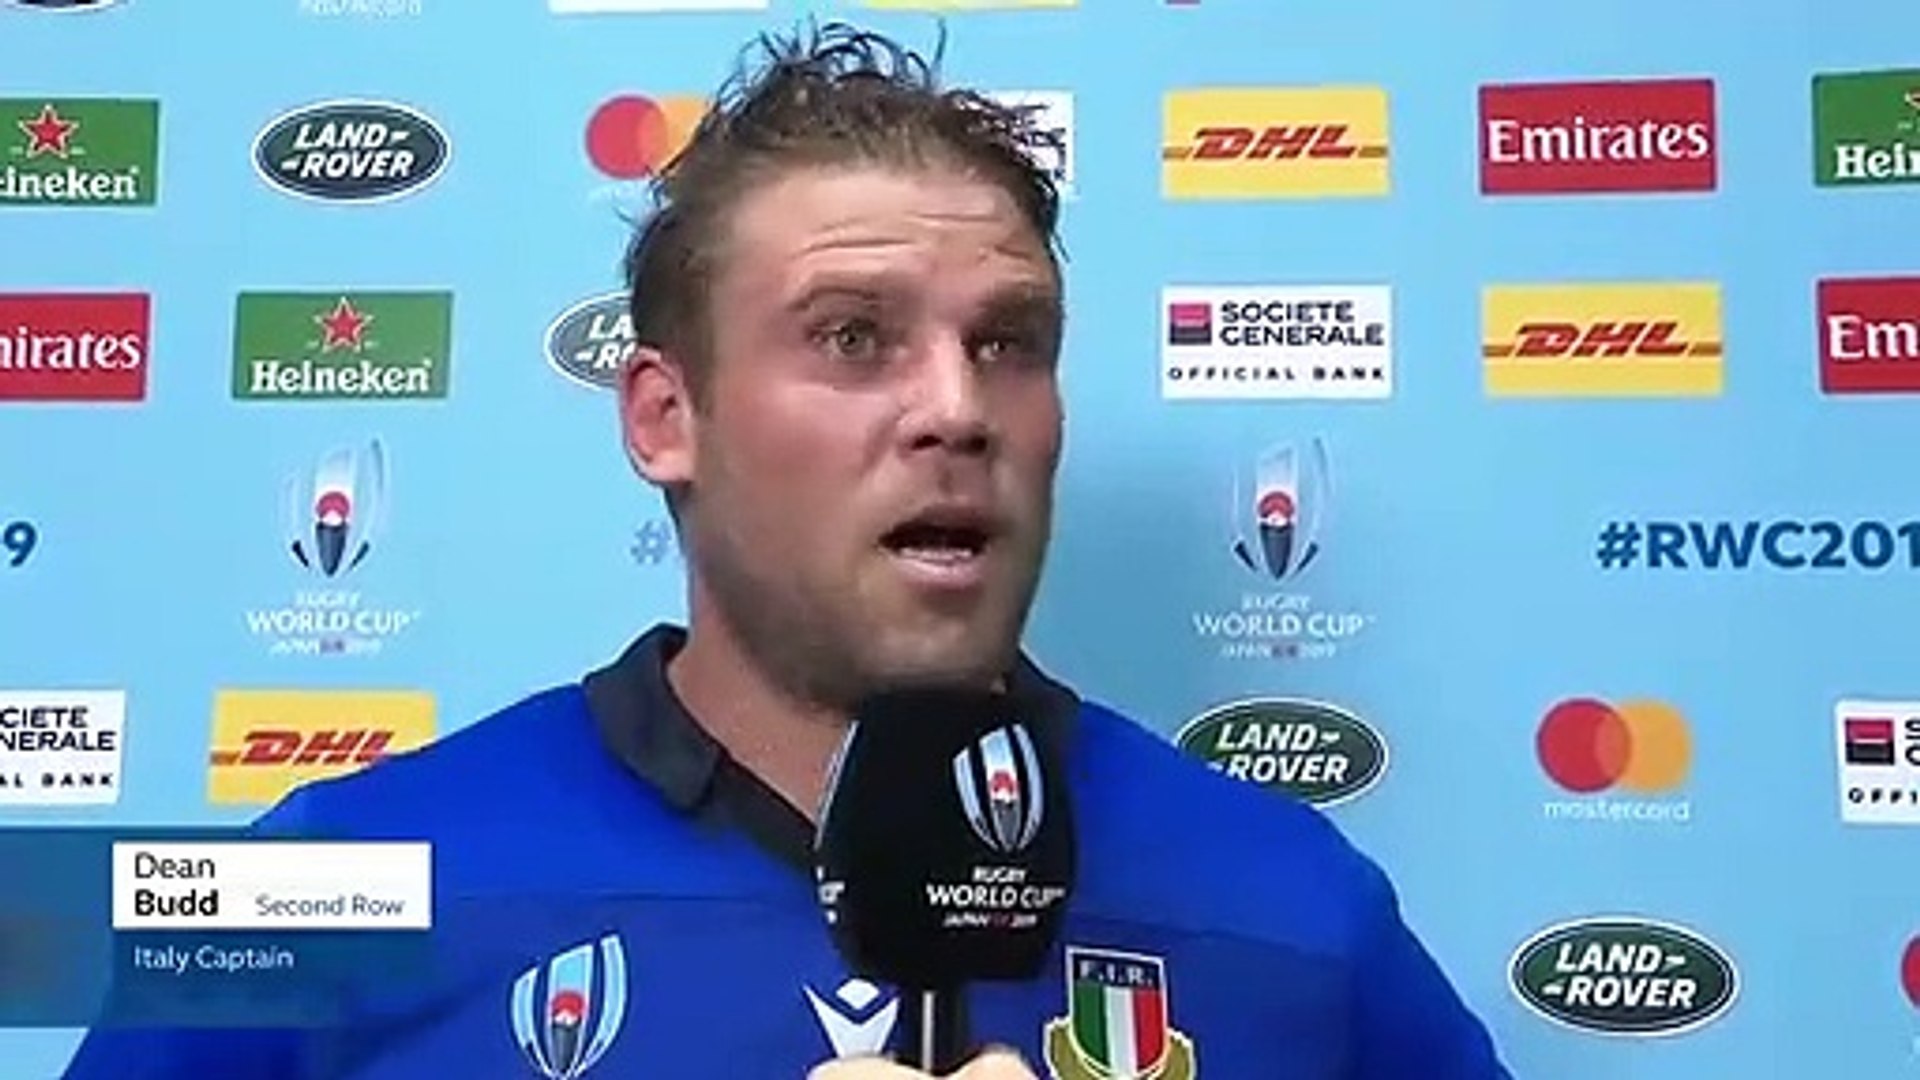 Italy captain Dean Budd on second win at Rugby World Cup 2019 - video  Dailymotion